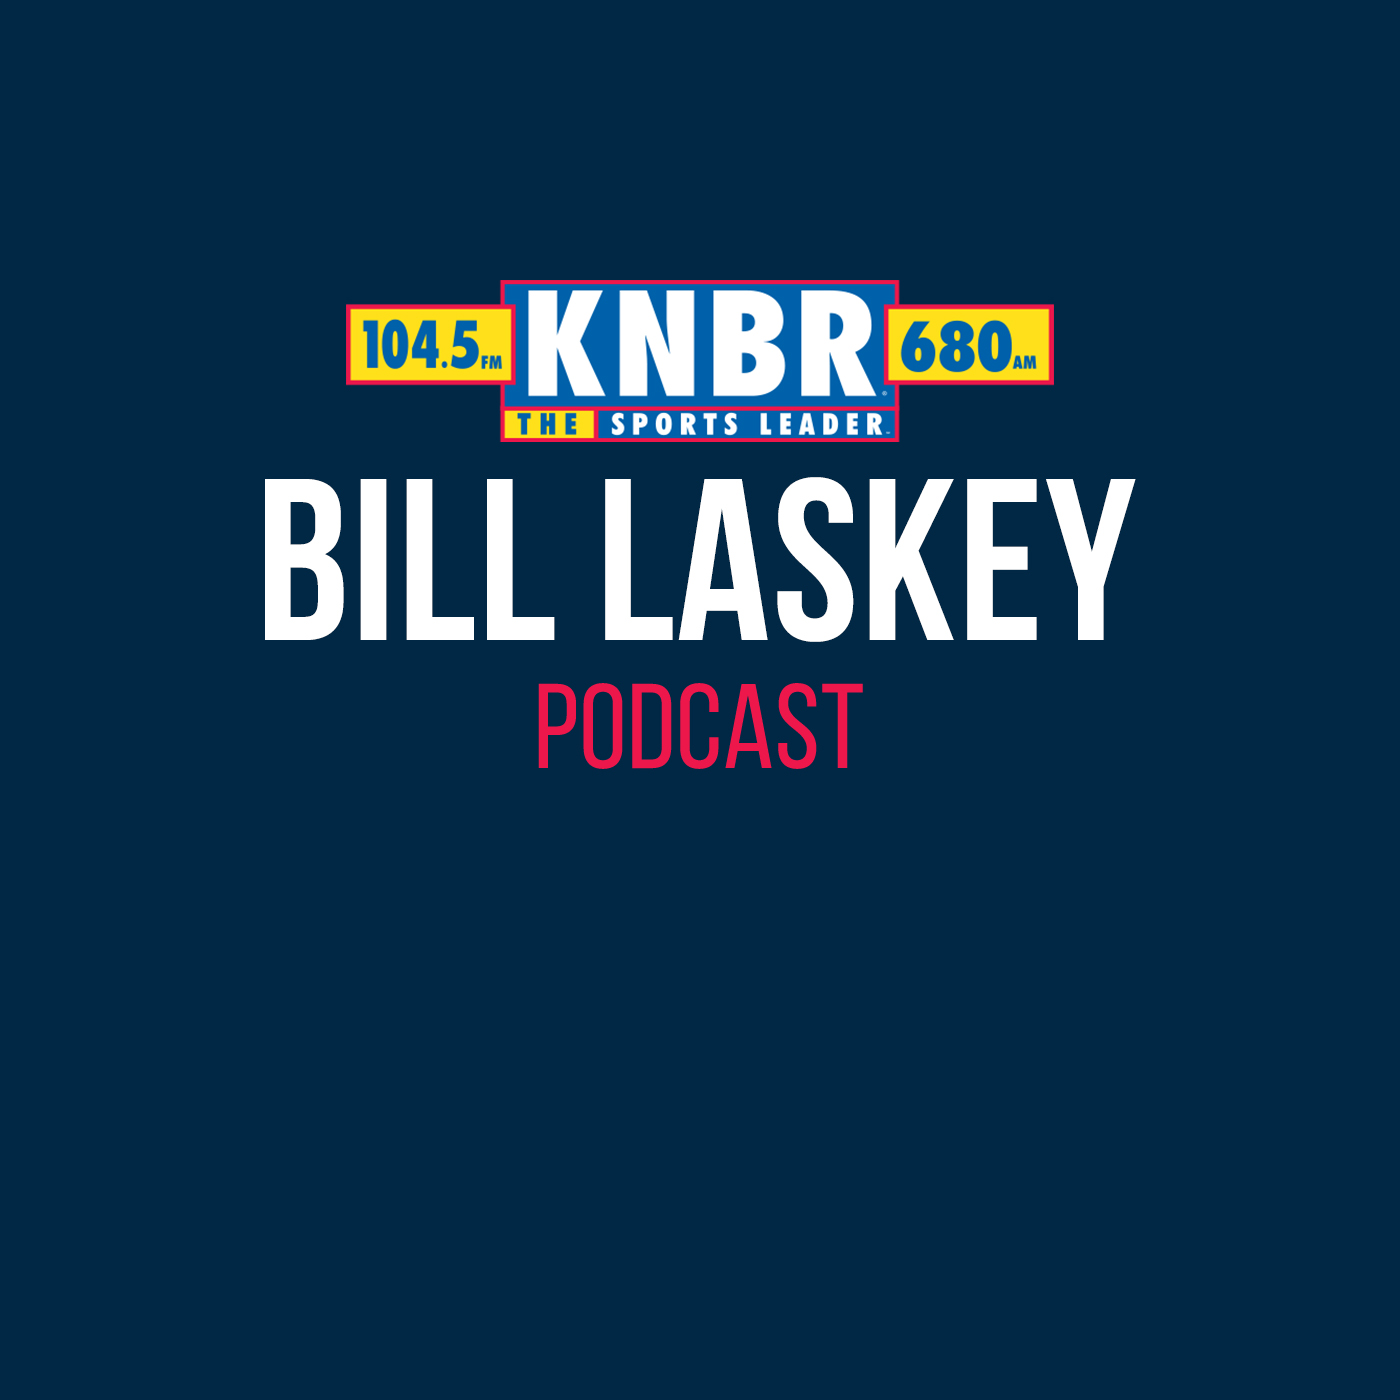 7-30 Bill Laskey joins Tolbert Krueger and Brooks to Talk About The Newest Giant Kris Bryant